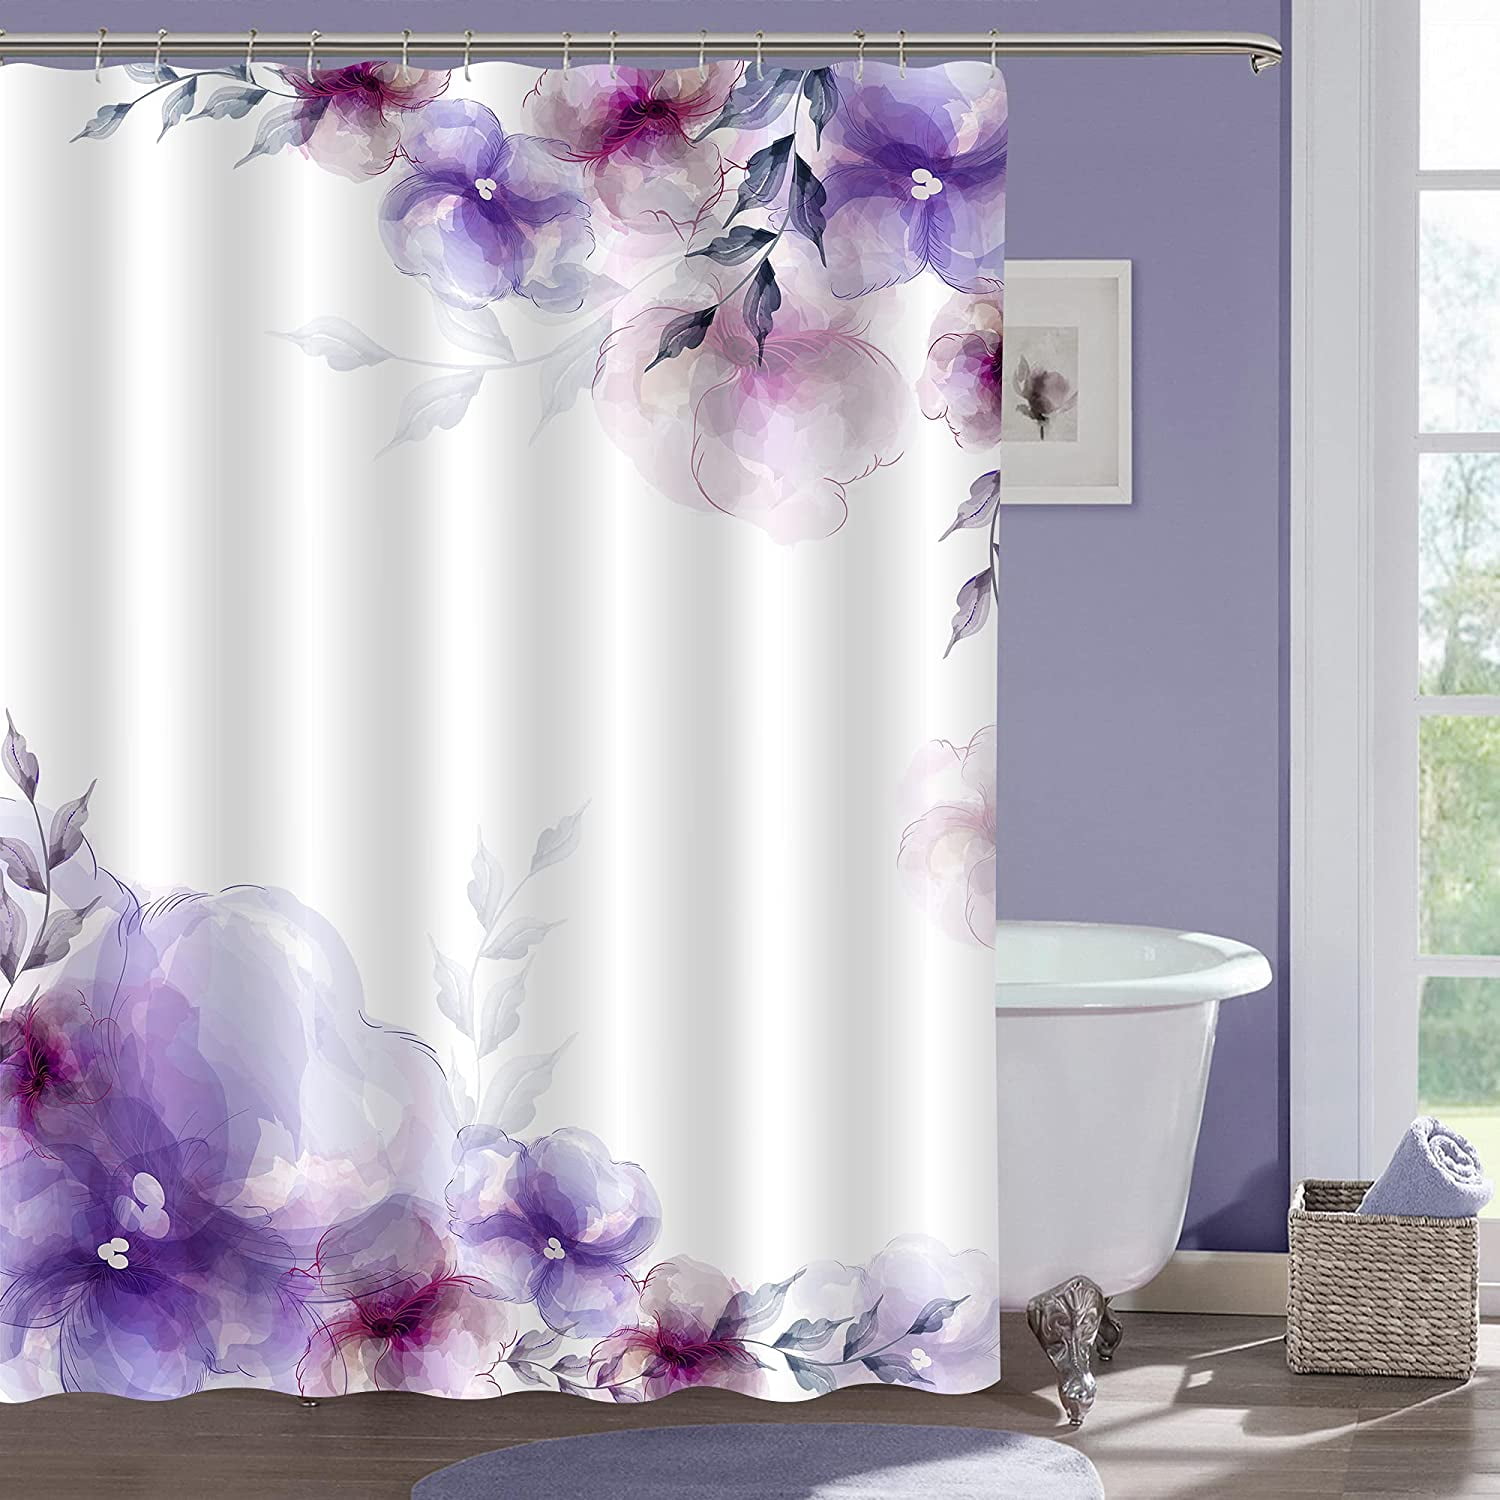 Becan Flower Shower Curtain Blossoms Purple Flower Plants Abstract Shadow Backdrop with Floral Flowers Polyester Fabric Waterproof Layer Thickening Shower Curtain 72X72Inches Purple White